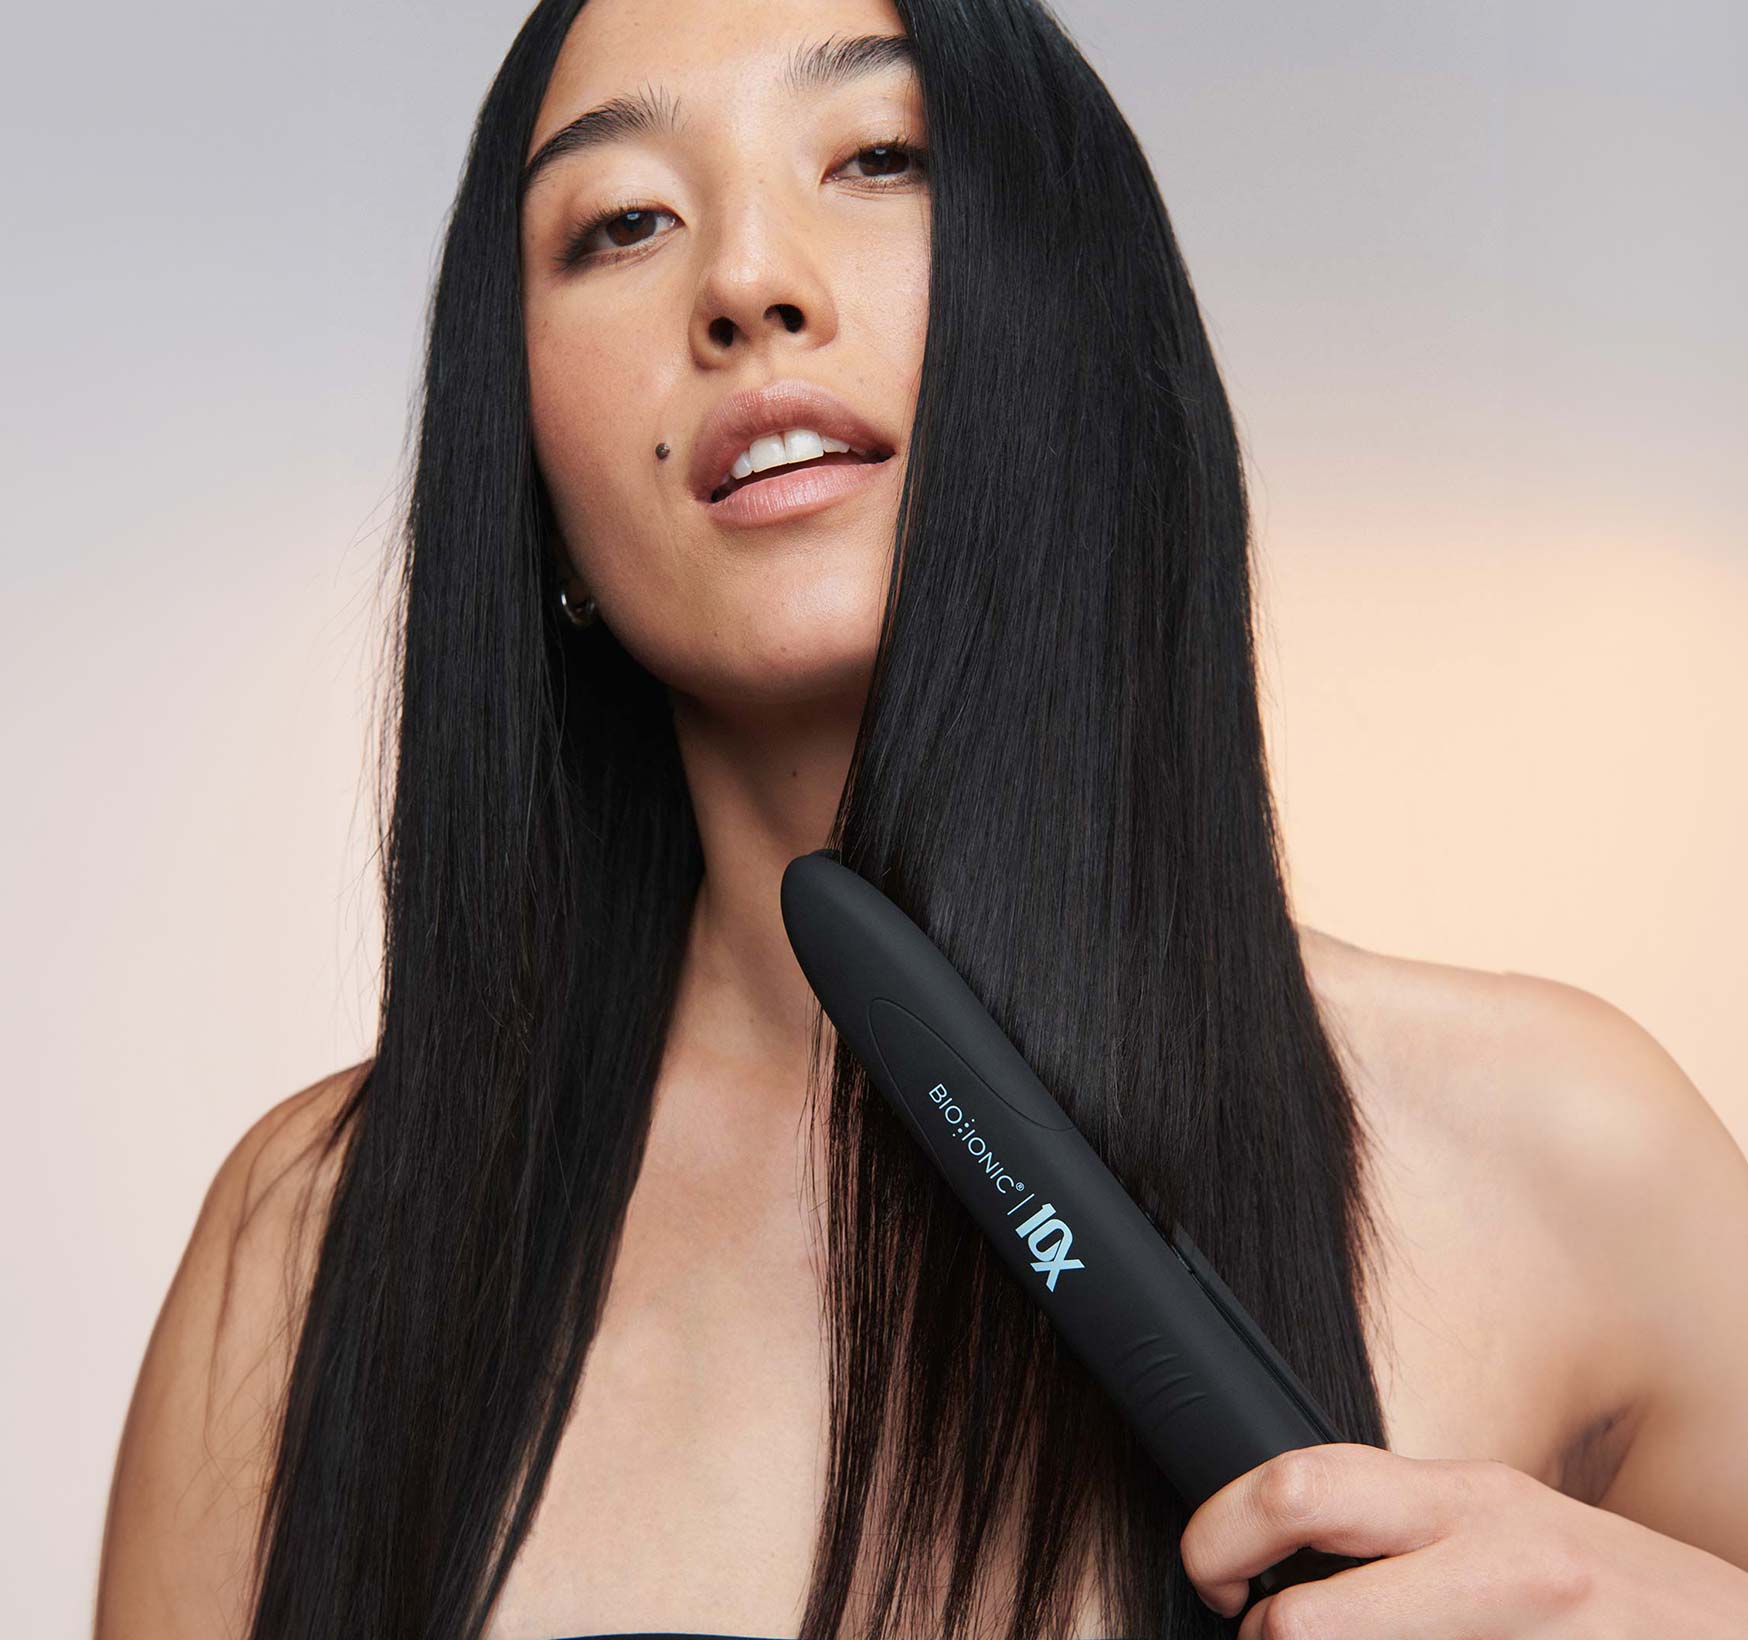 15 Best Hair Straighteners and Flat Irons for All Hair